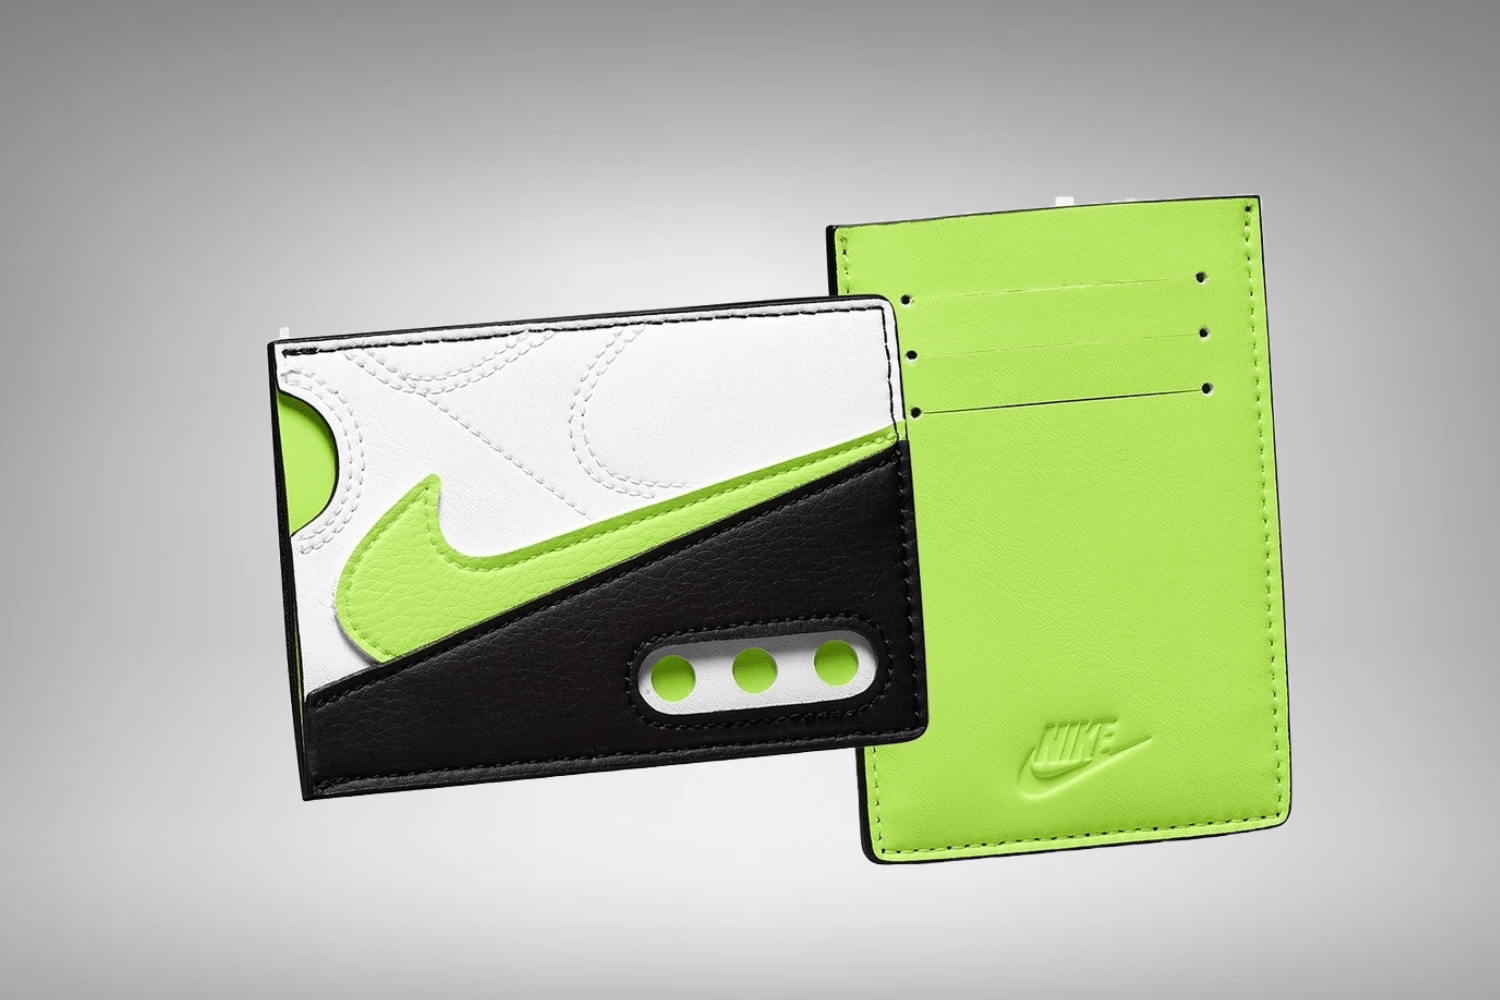 Nike Wallets take inspiration from iconic sneaker models